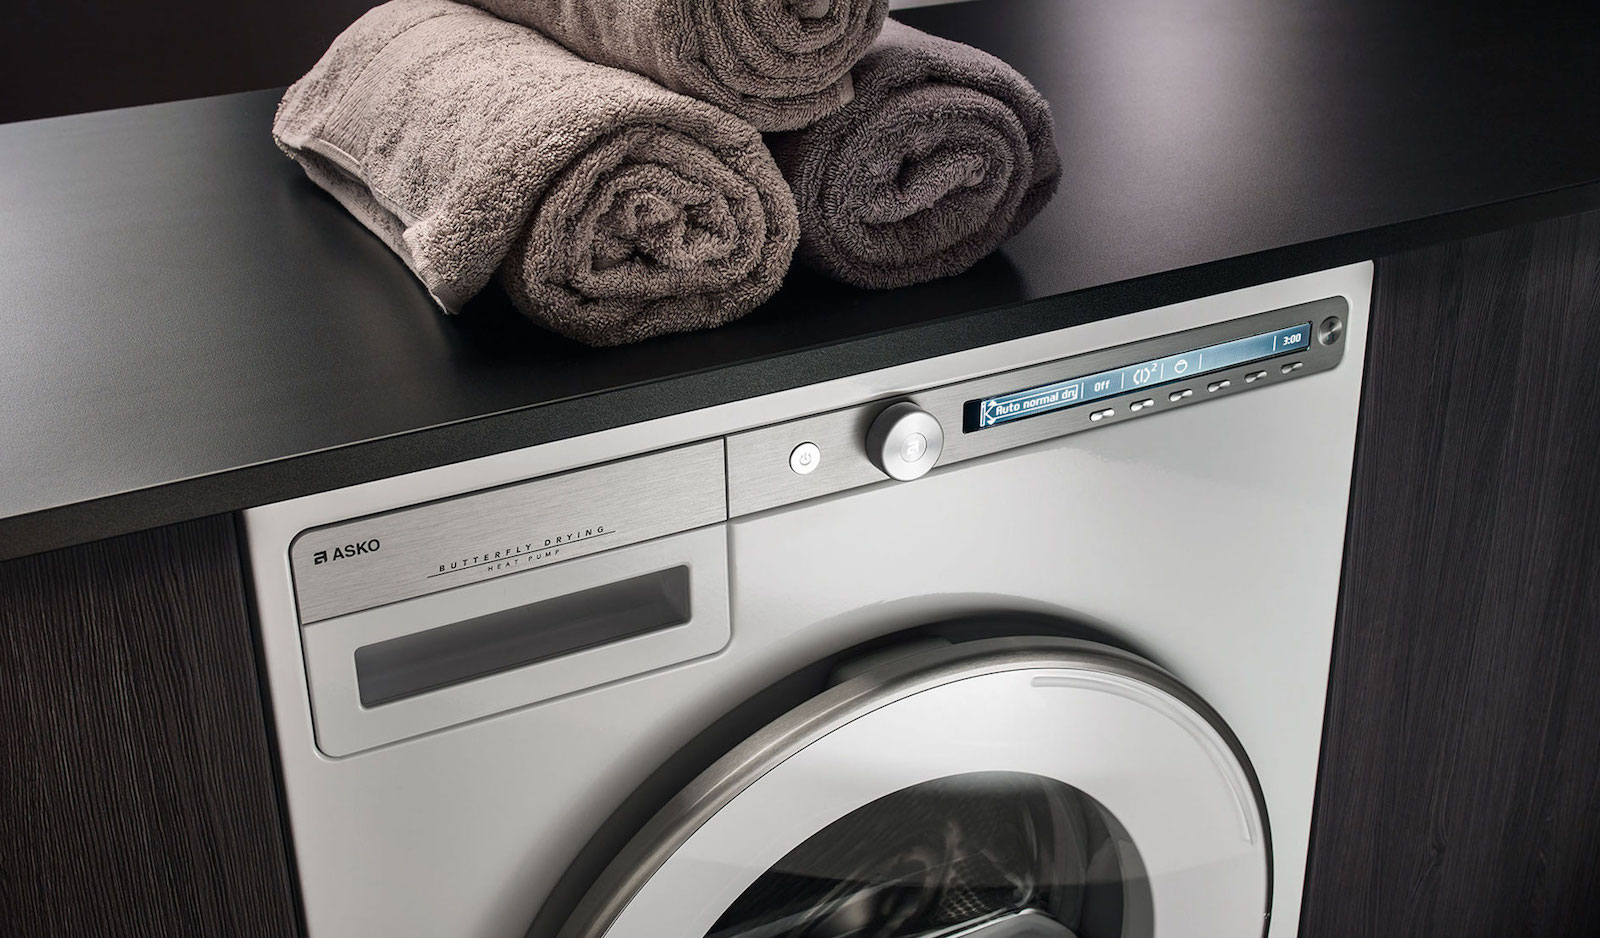 ASKO-Laundry-Tumble-Dryers-Features-Eliminating-your-biggest-troubles-resized.jpg